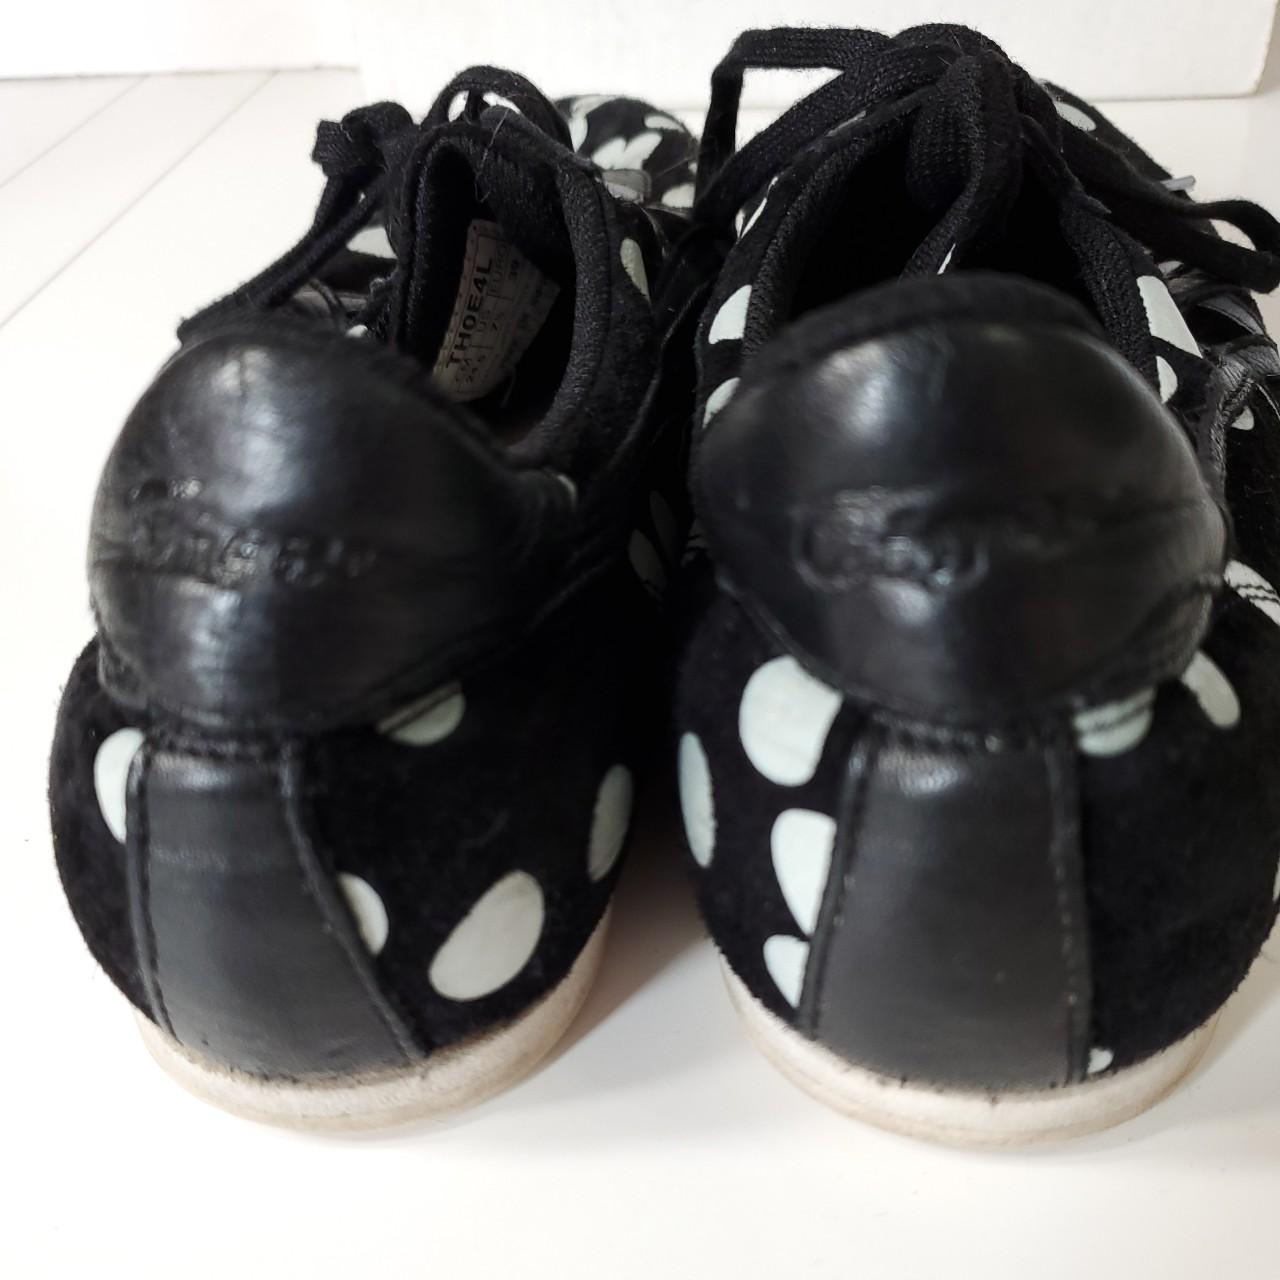 Onitsuka Tiger Women's Black and White Trainers (3)